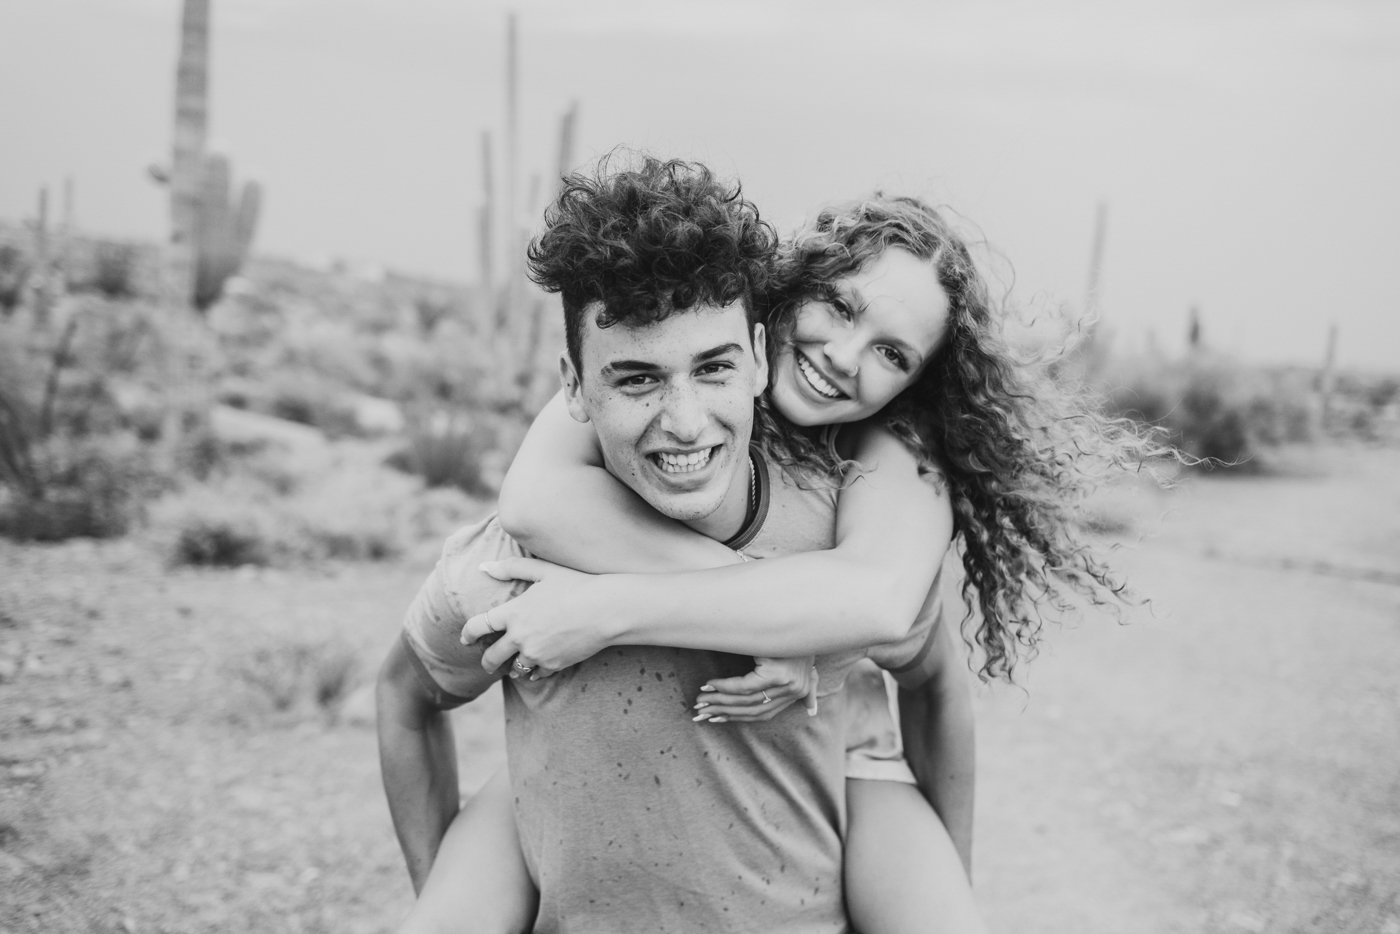 woman getting piggy back ride in desert while both smile